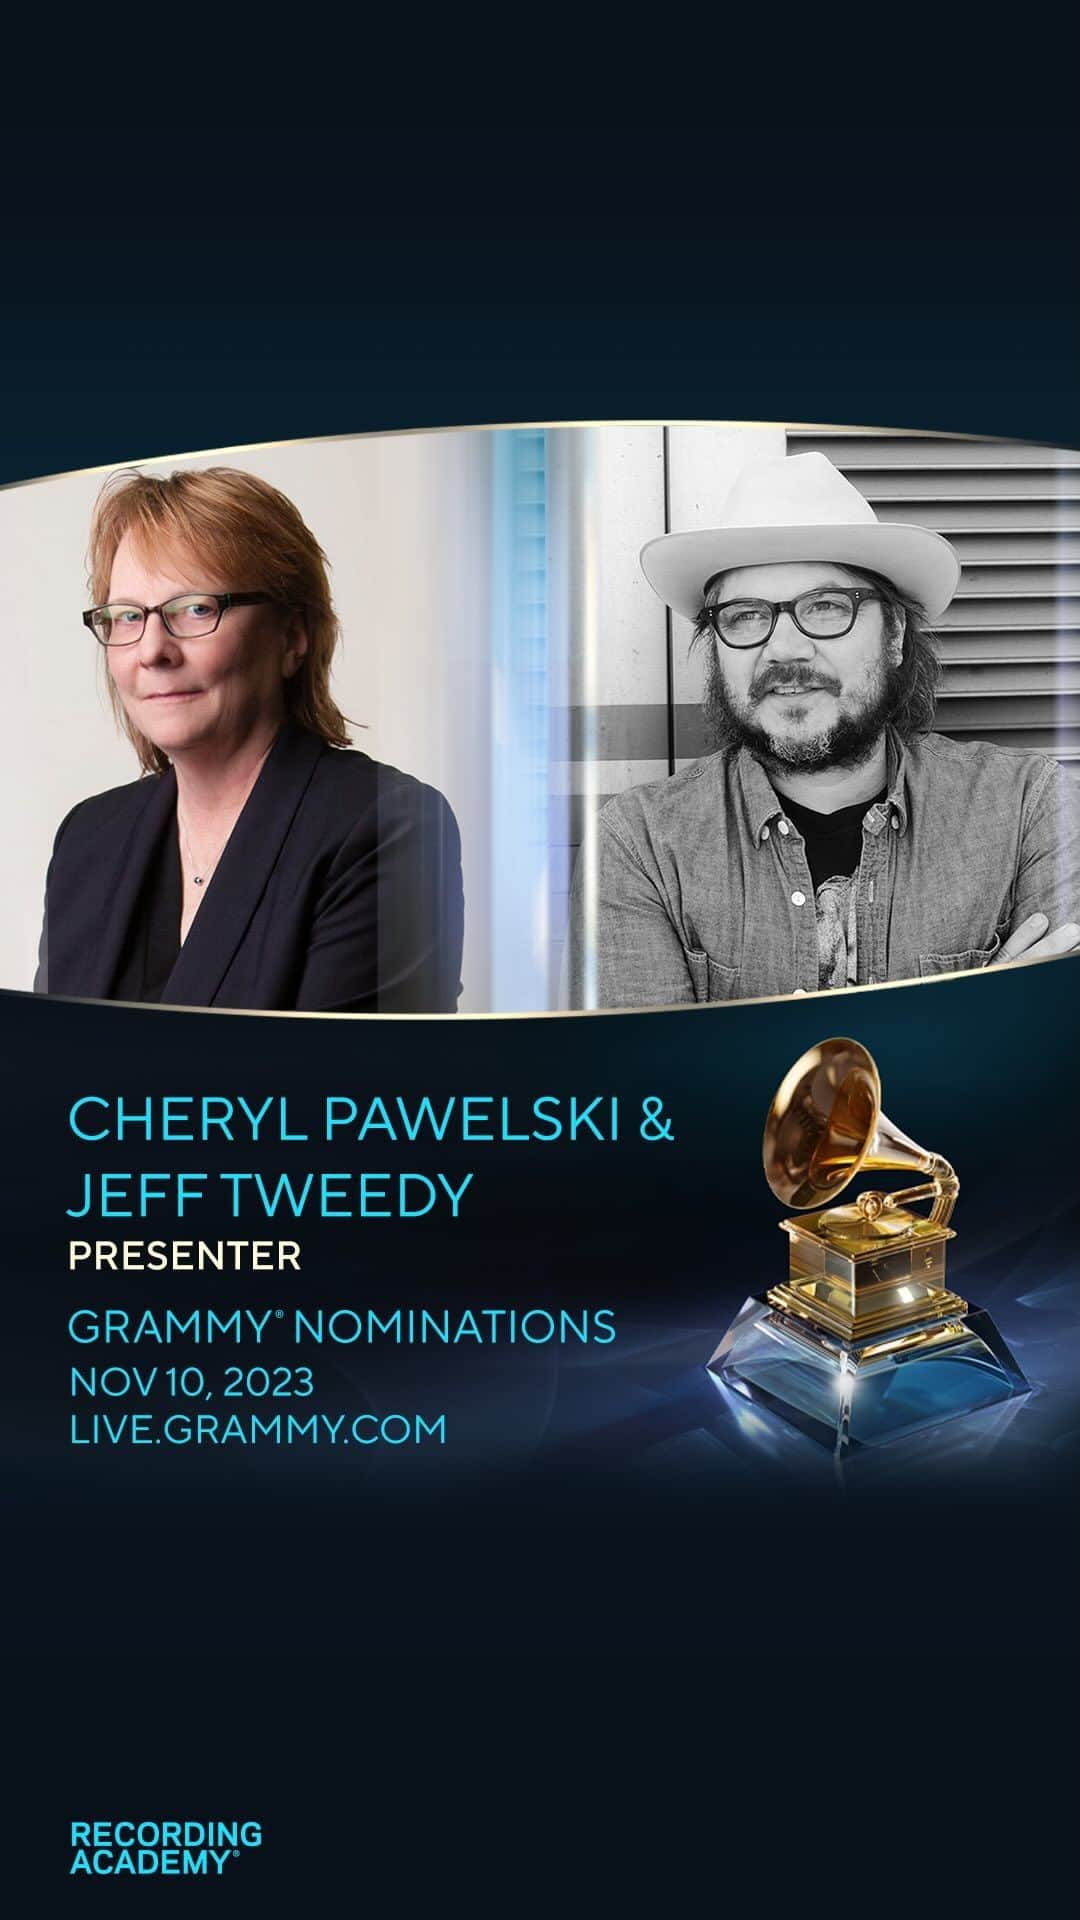 The GRAMMYsのインスタグラム：「GRAMMY nominations just keep getting better! ✨   🎶 Join #JeffTweedy and #CherylPawelski at 7:45 AM PT / 10:45 AM ET on November 10th, on live.GRAMMY.com, as they help us unveil #GRAMMYs nominations.」